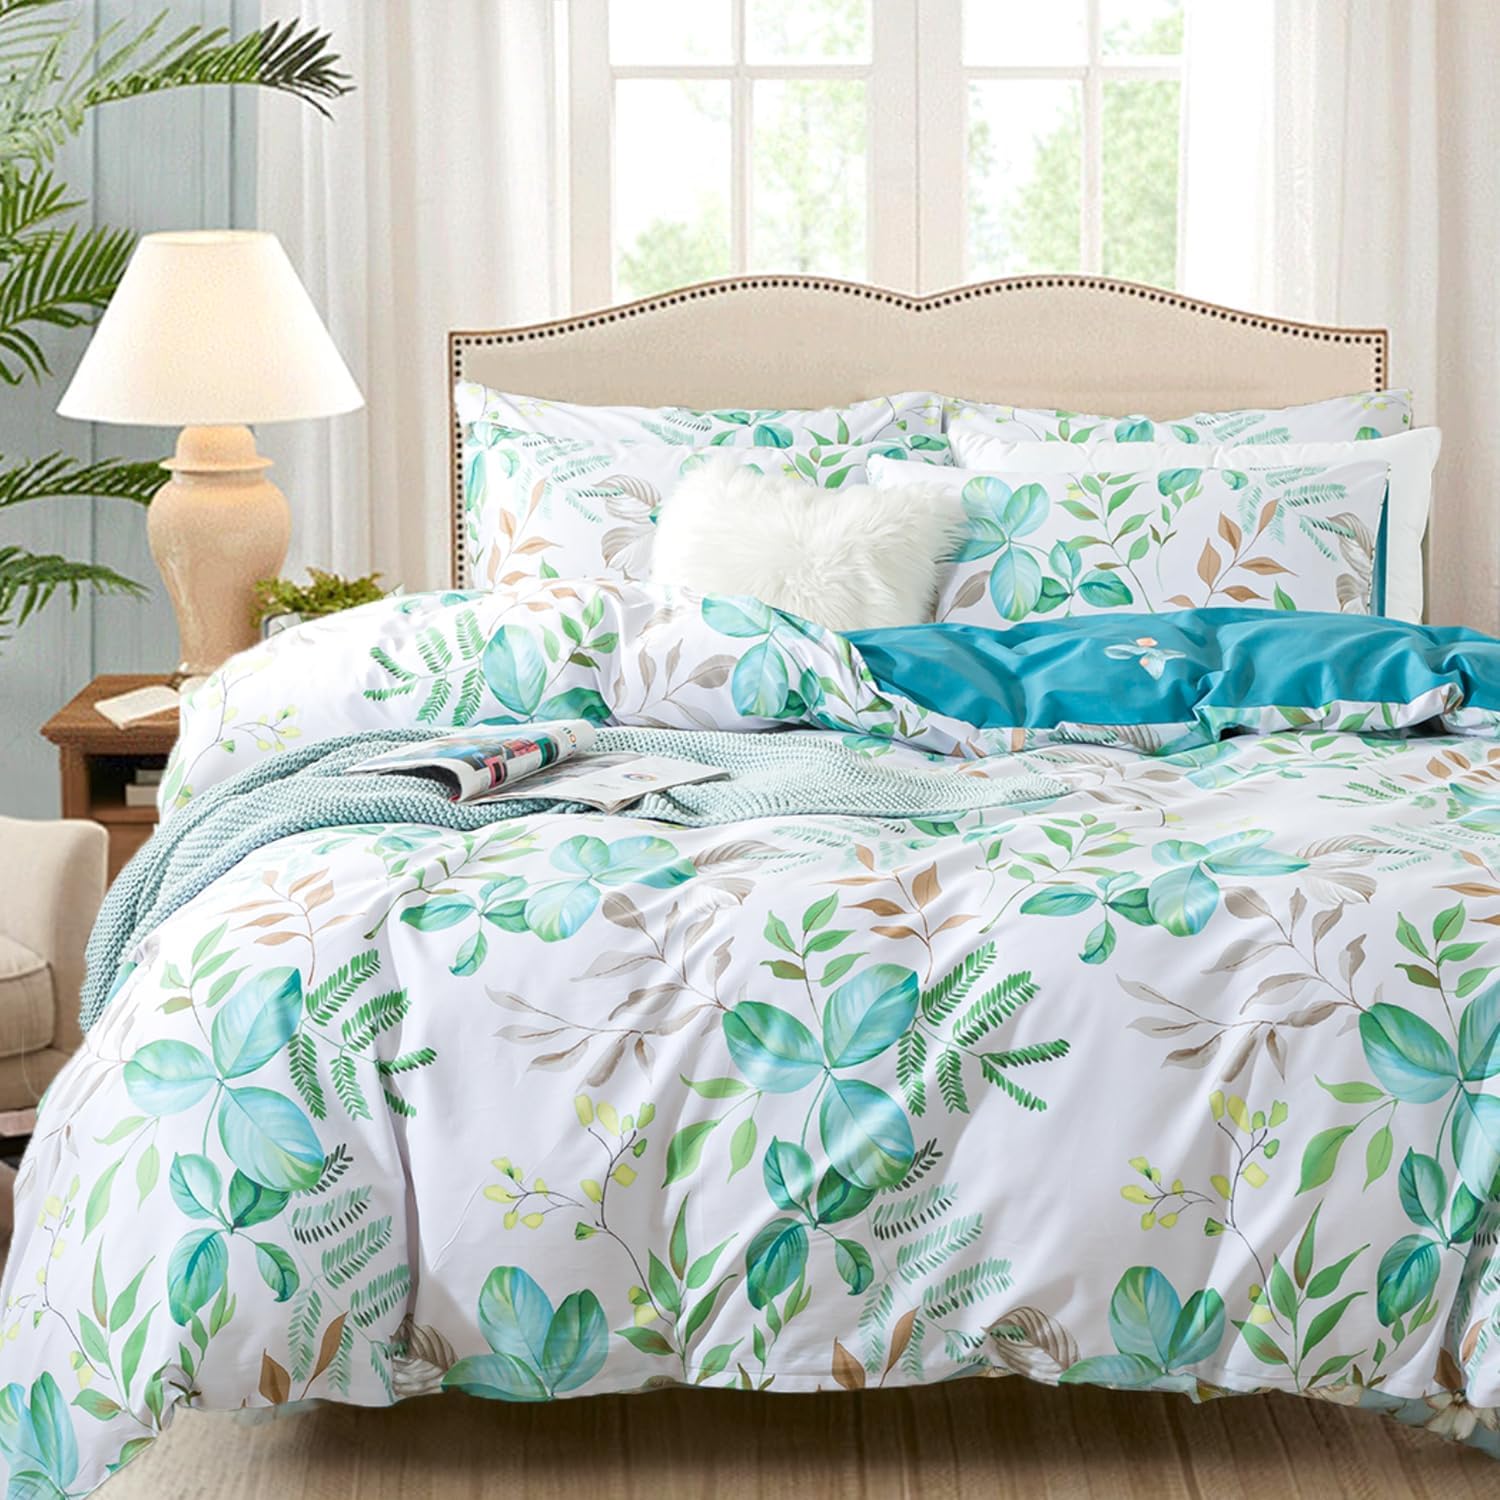 FADFAY Botanical Duvet Cover Sets Queen Size 100% Cotton Teal Green Leaves Patterned Comforter Cover Aesthetic Bedding for All Season Soft Crisp Modern Bed Cover with Zipper 3 Pcs, Queen